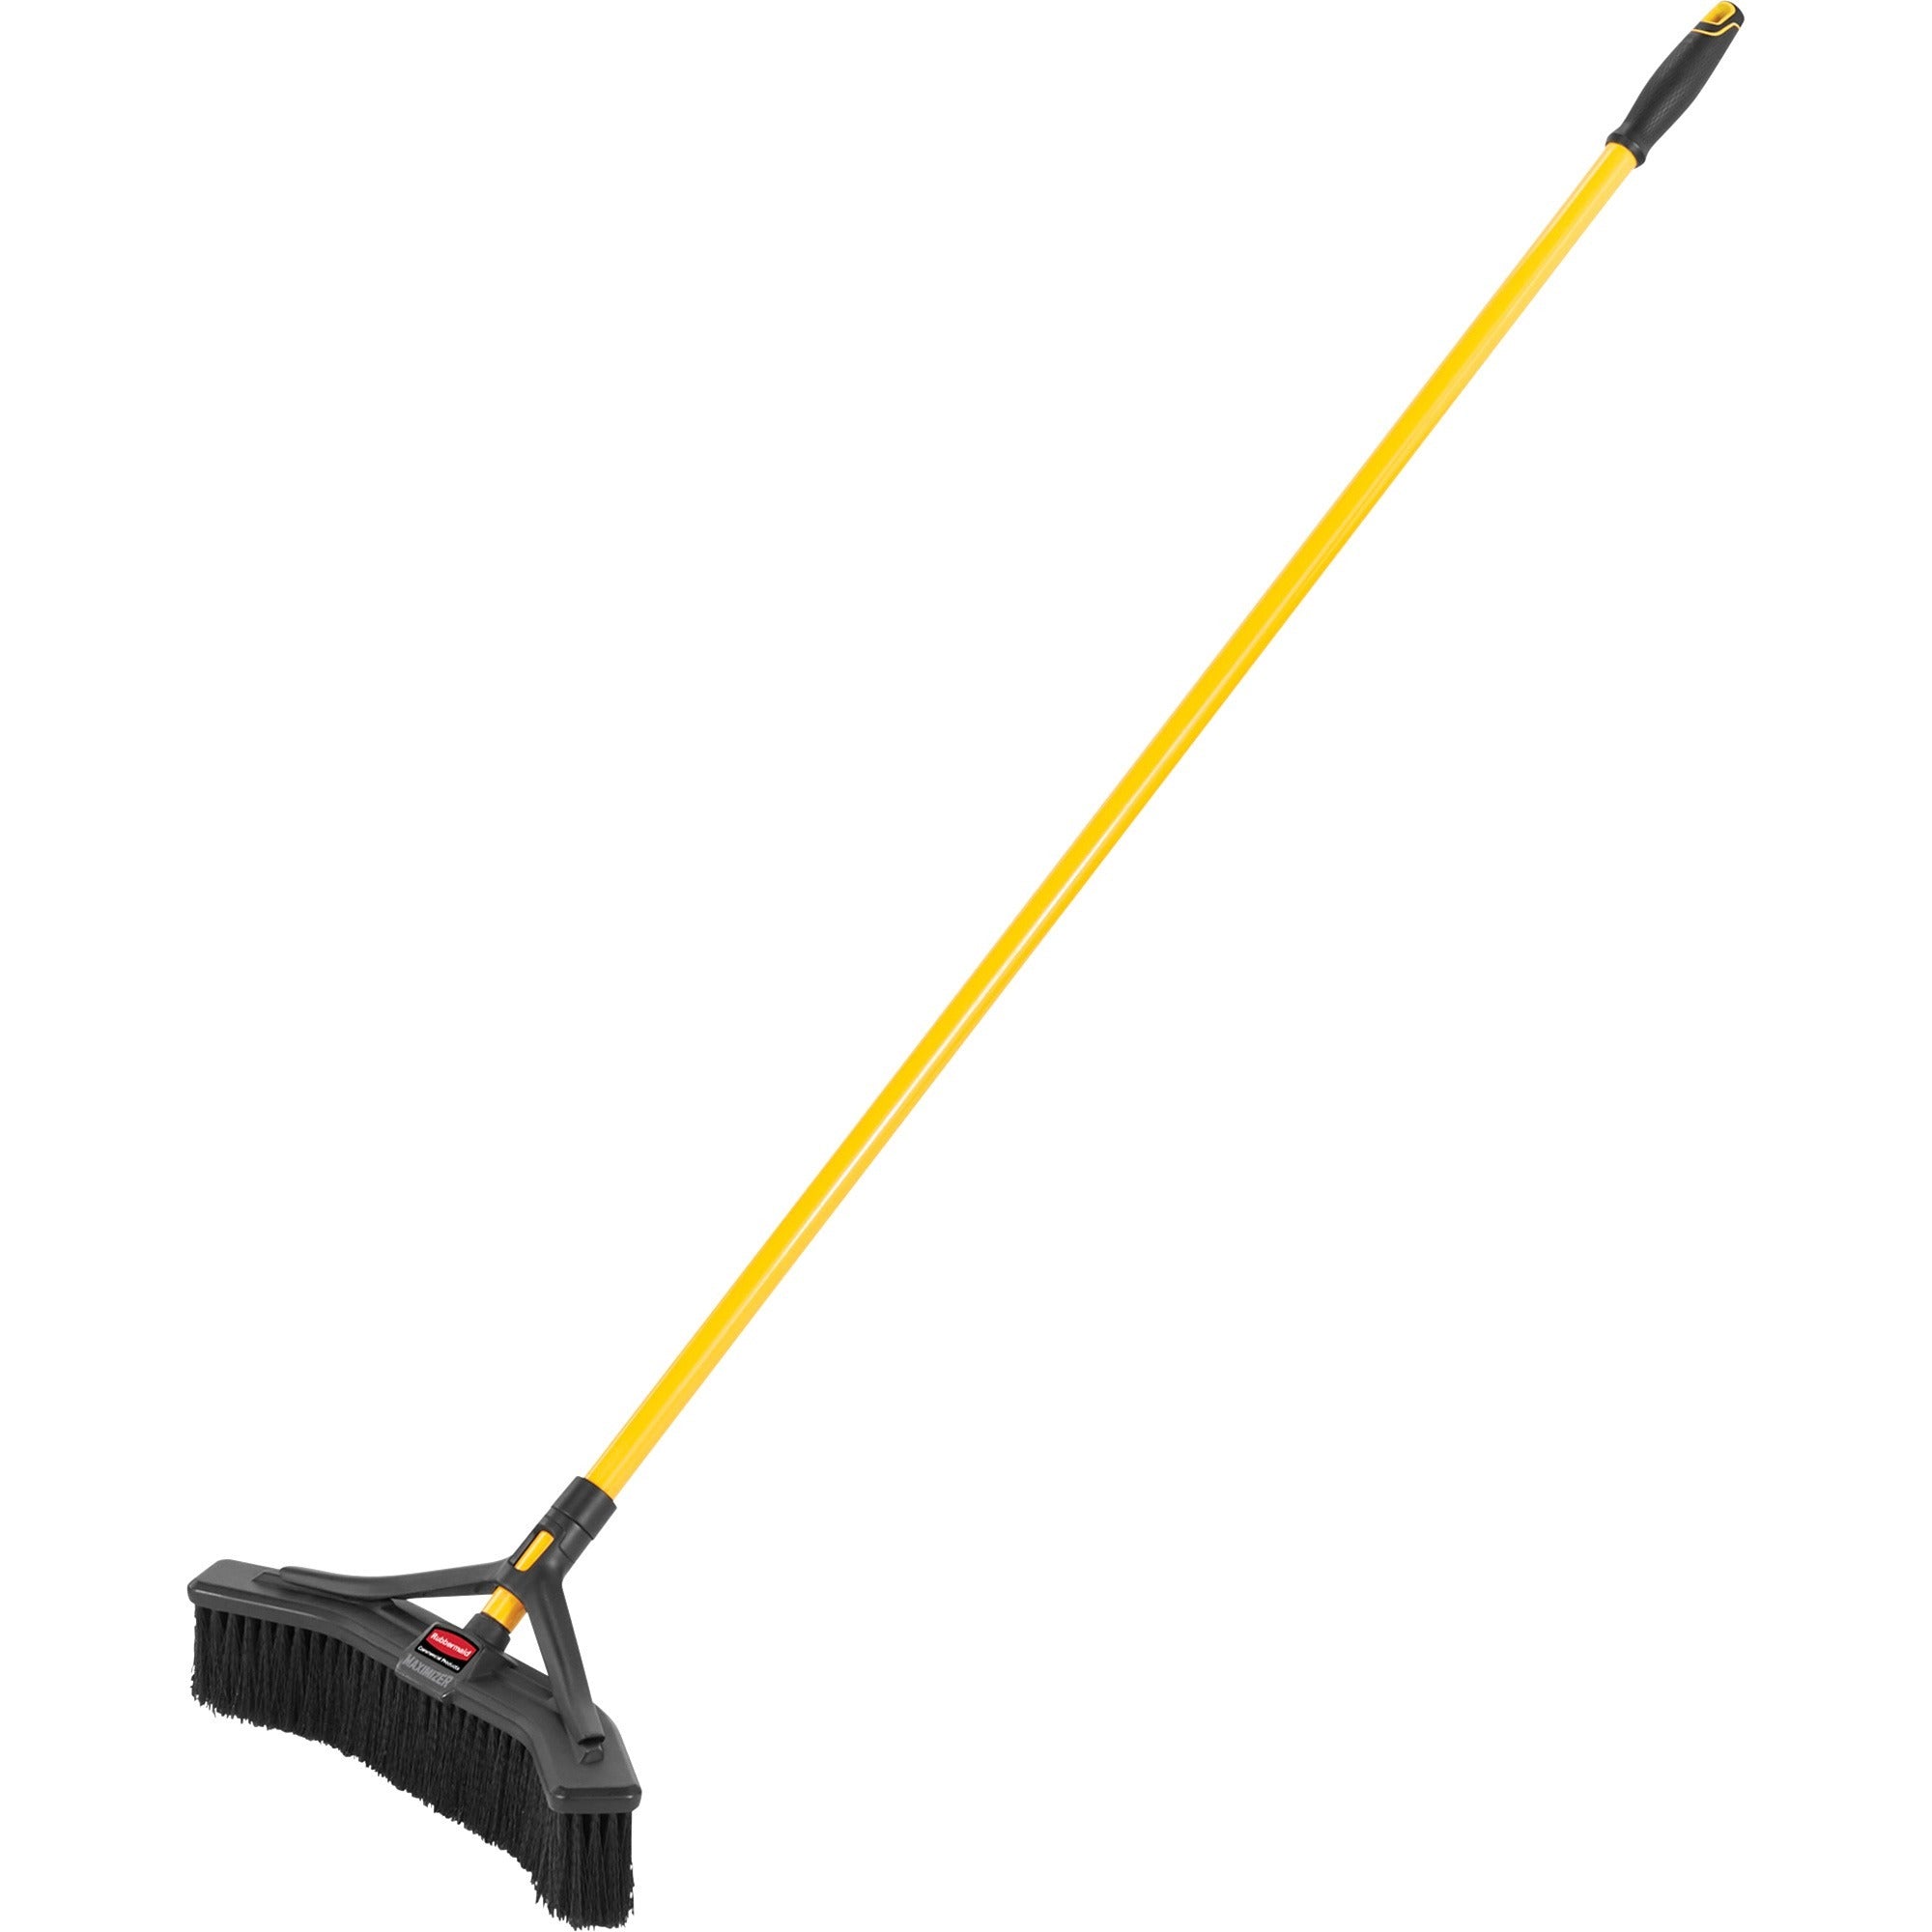 rubbermaid-commercial-maximizer-push-to-center-18-brooms-polypropylene-bristle-581-overall-length-steel-handle-6-carton_rcp2018727ct - 1